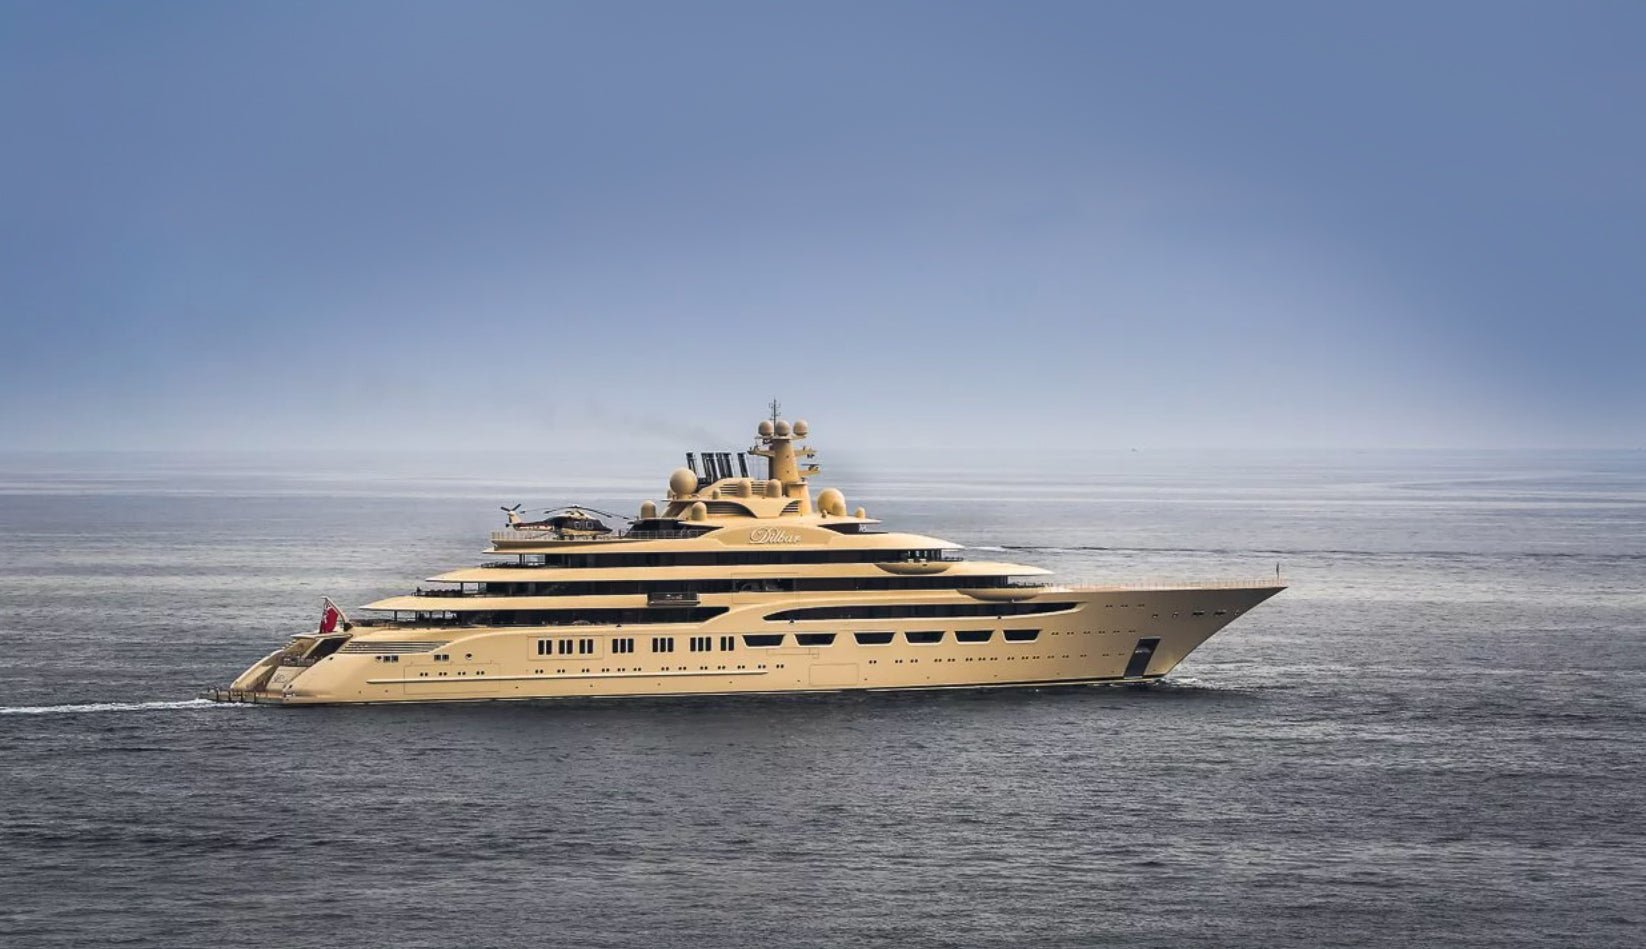 Russian Oligarchs' Yachts Hard To Confiscate. The Case Of Usmanov's $600m Super Yacht - DSF Antique Jewelry